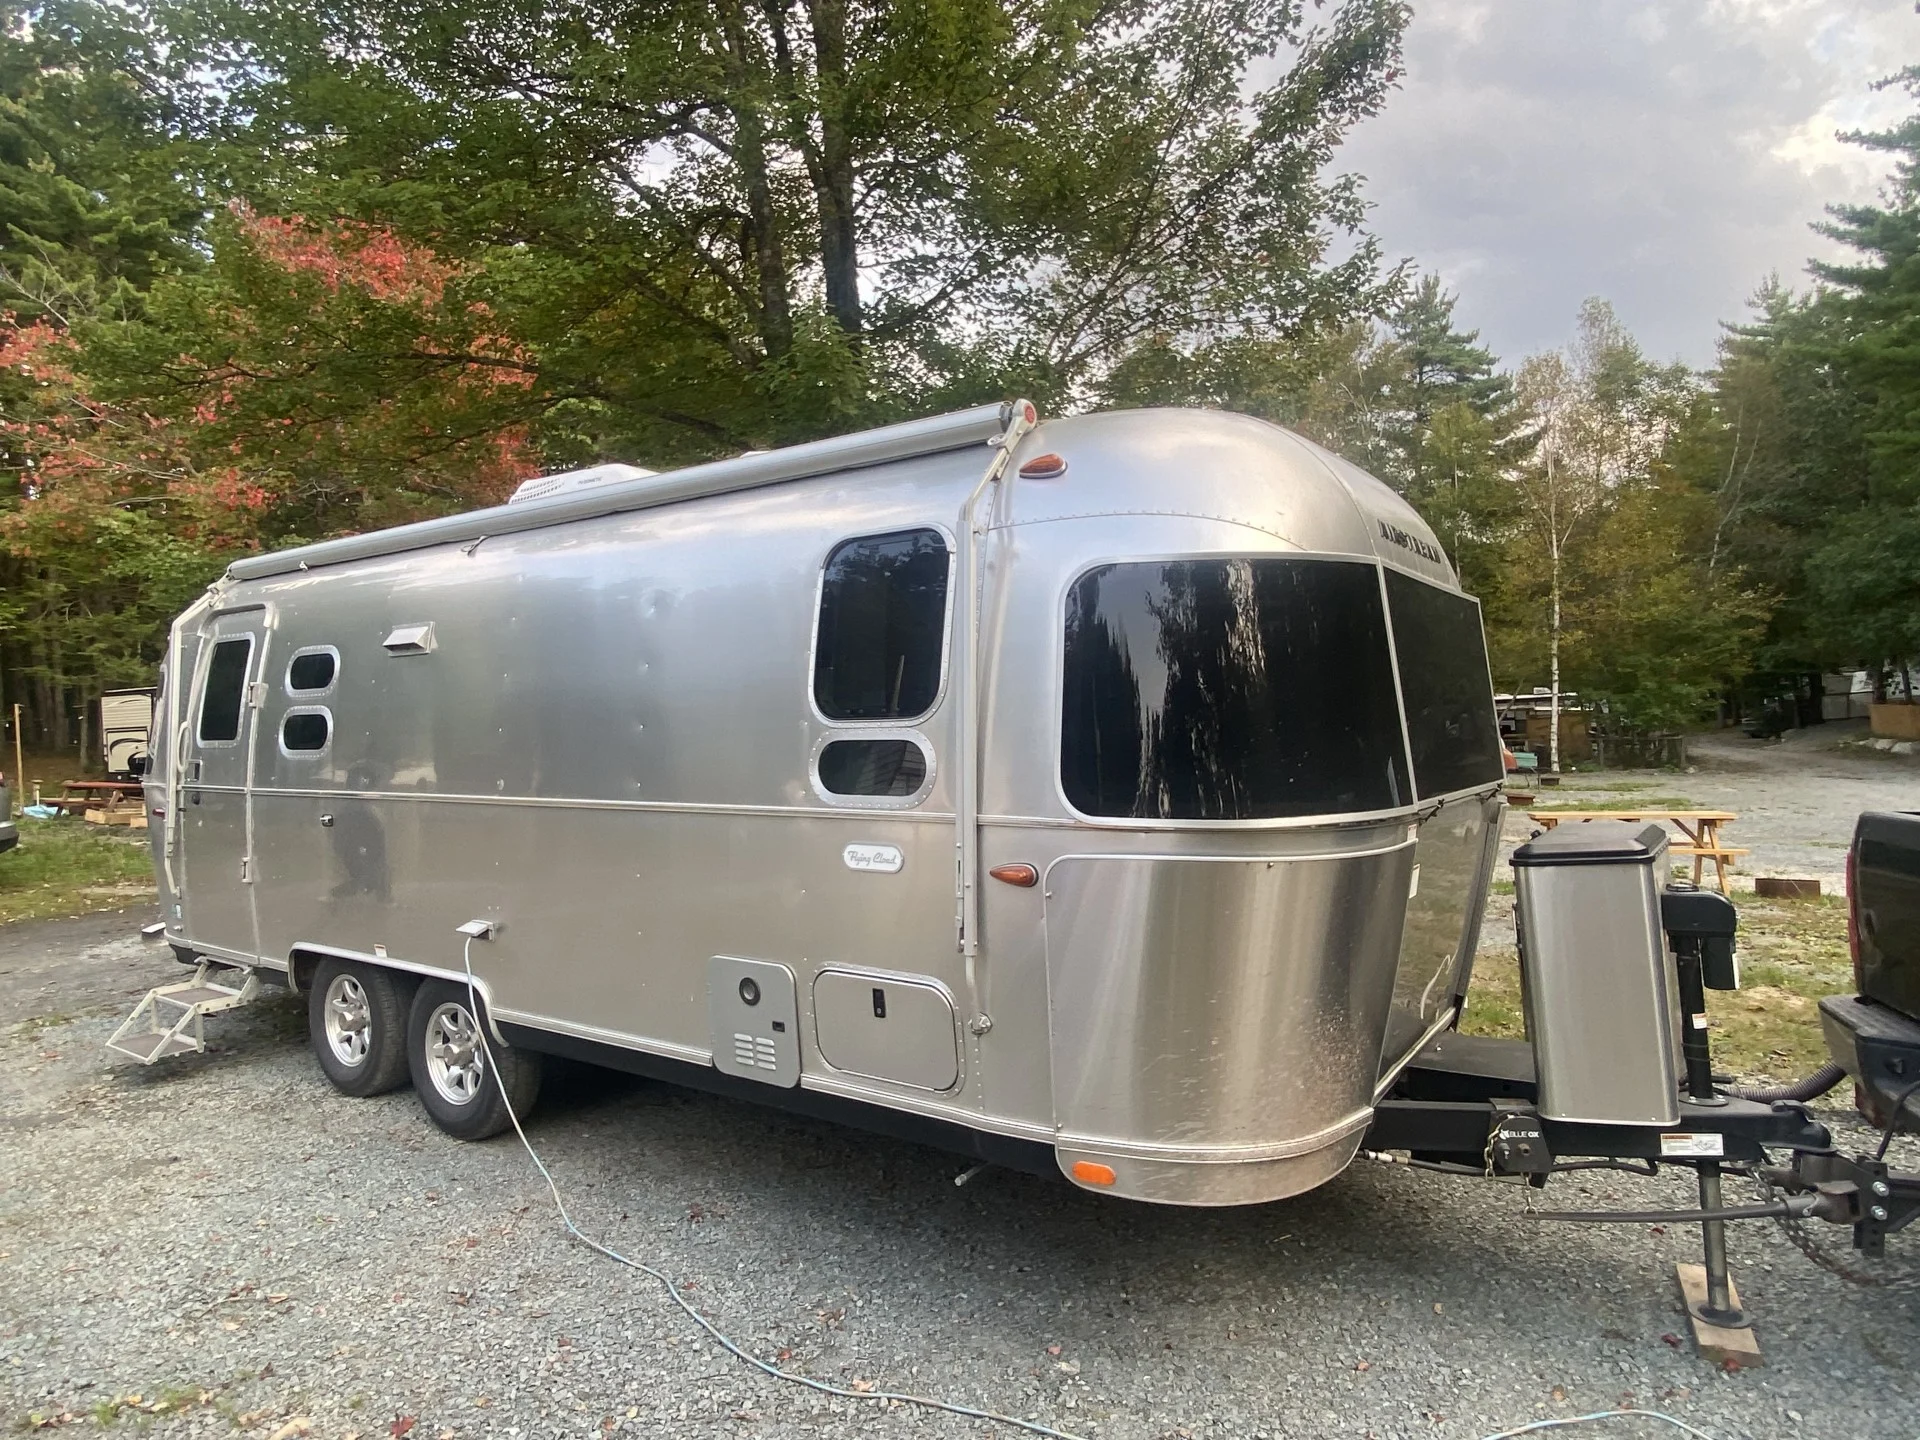 Airstream living has many perks, but safety should always be a top priority